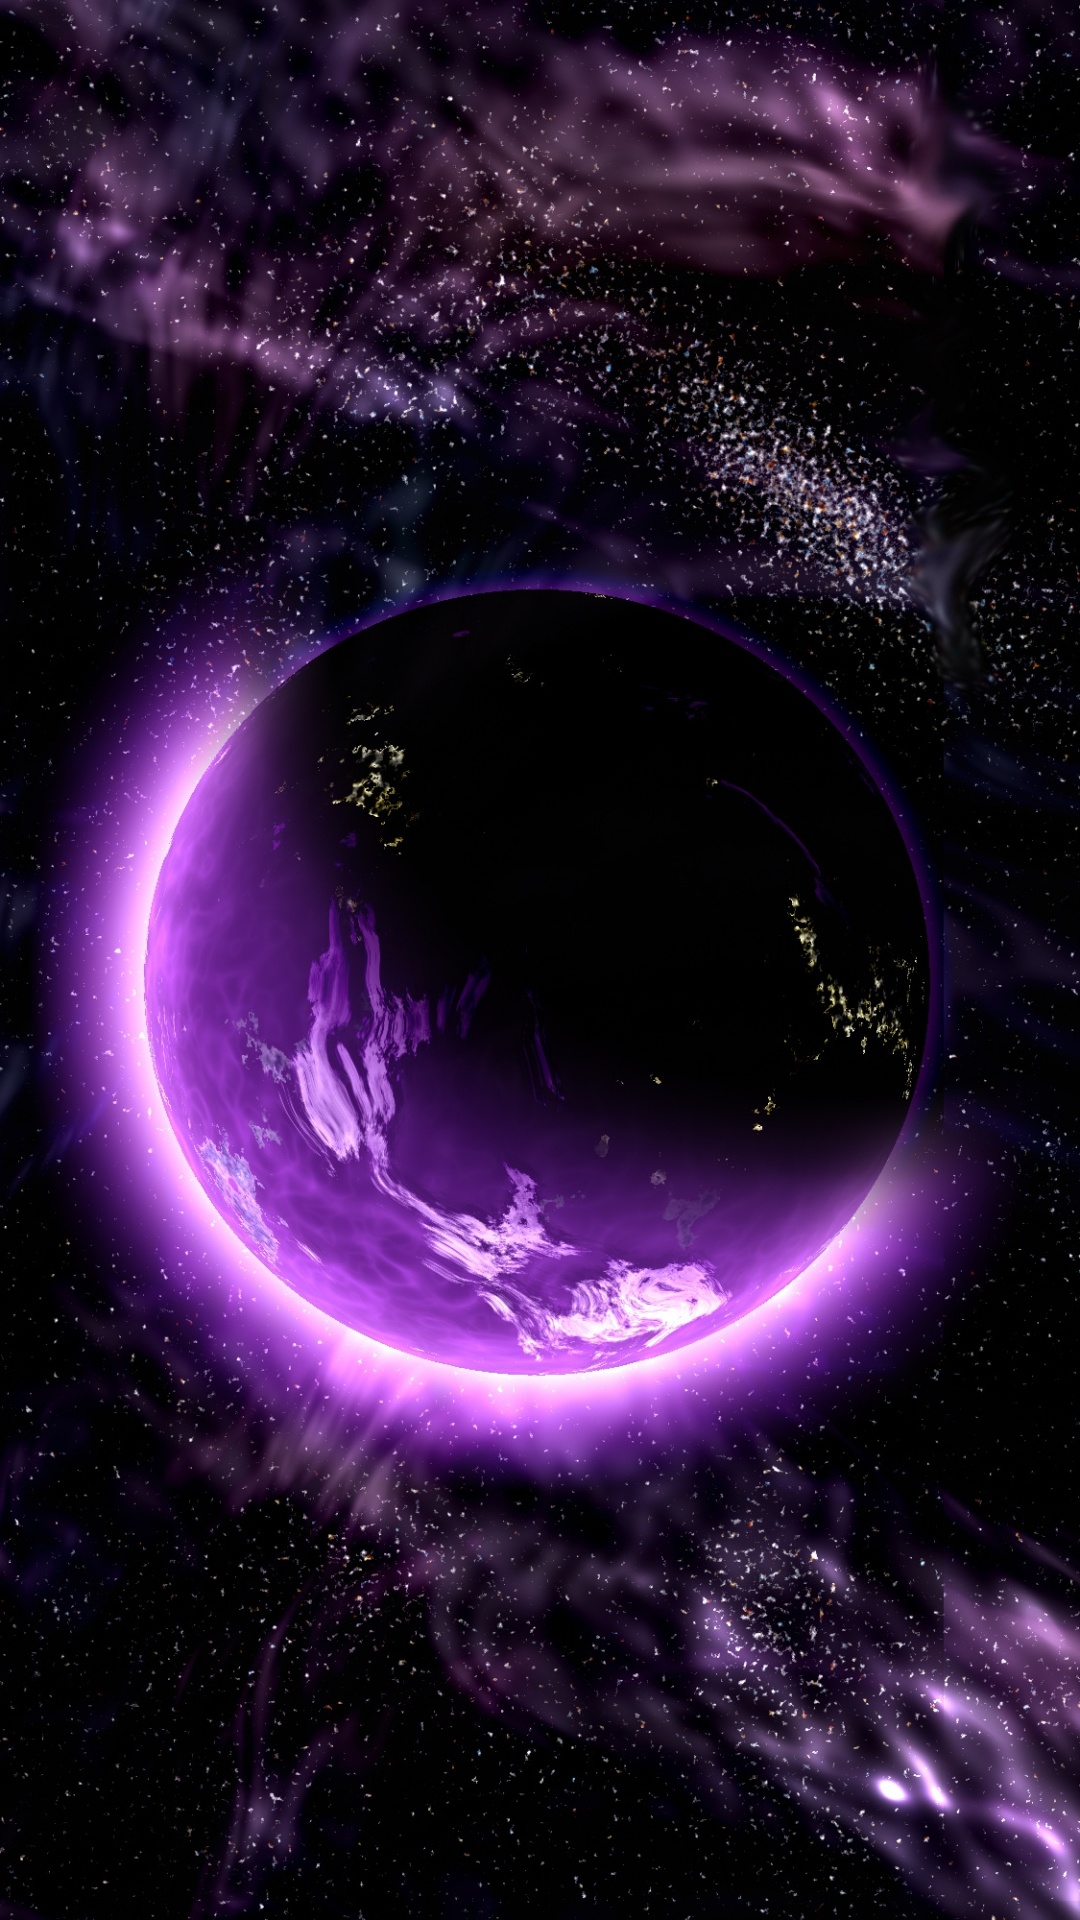 Purple and White Planet Illustration. Wallpaper in 1080x1920 Resolution